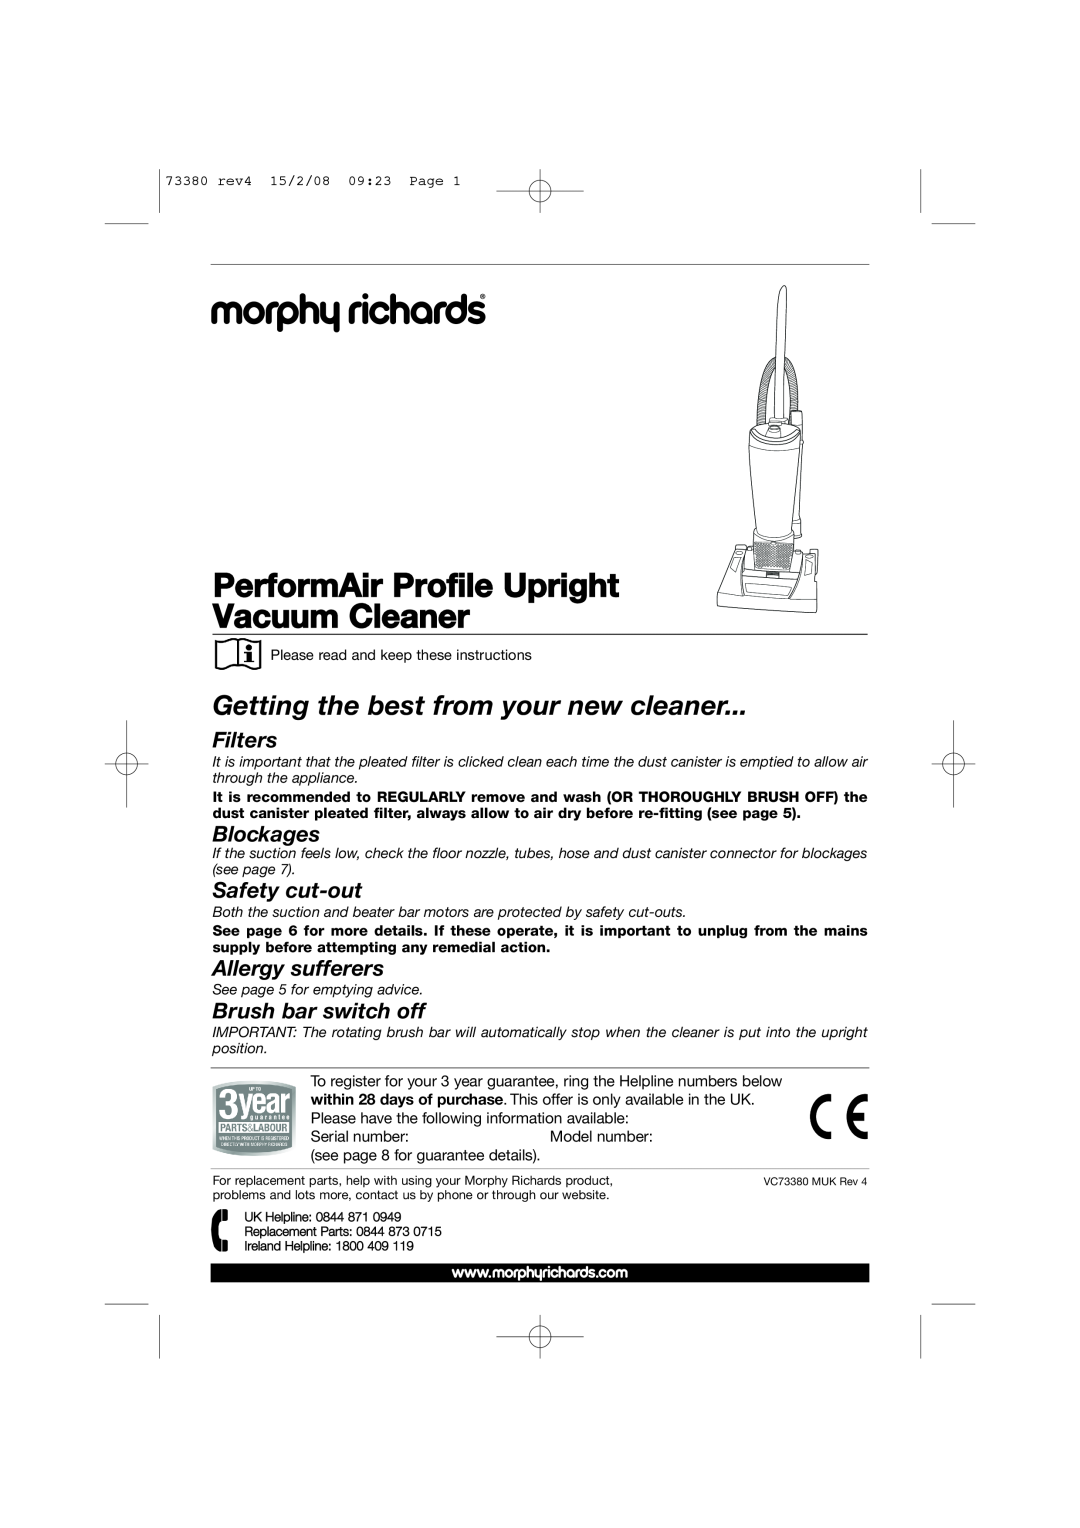 Morphy Richards 73380 manual PerformAir Profile Upright Vacuum Cleaner, Getting the best from your new cleaner, Filters 